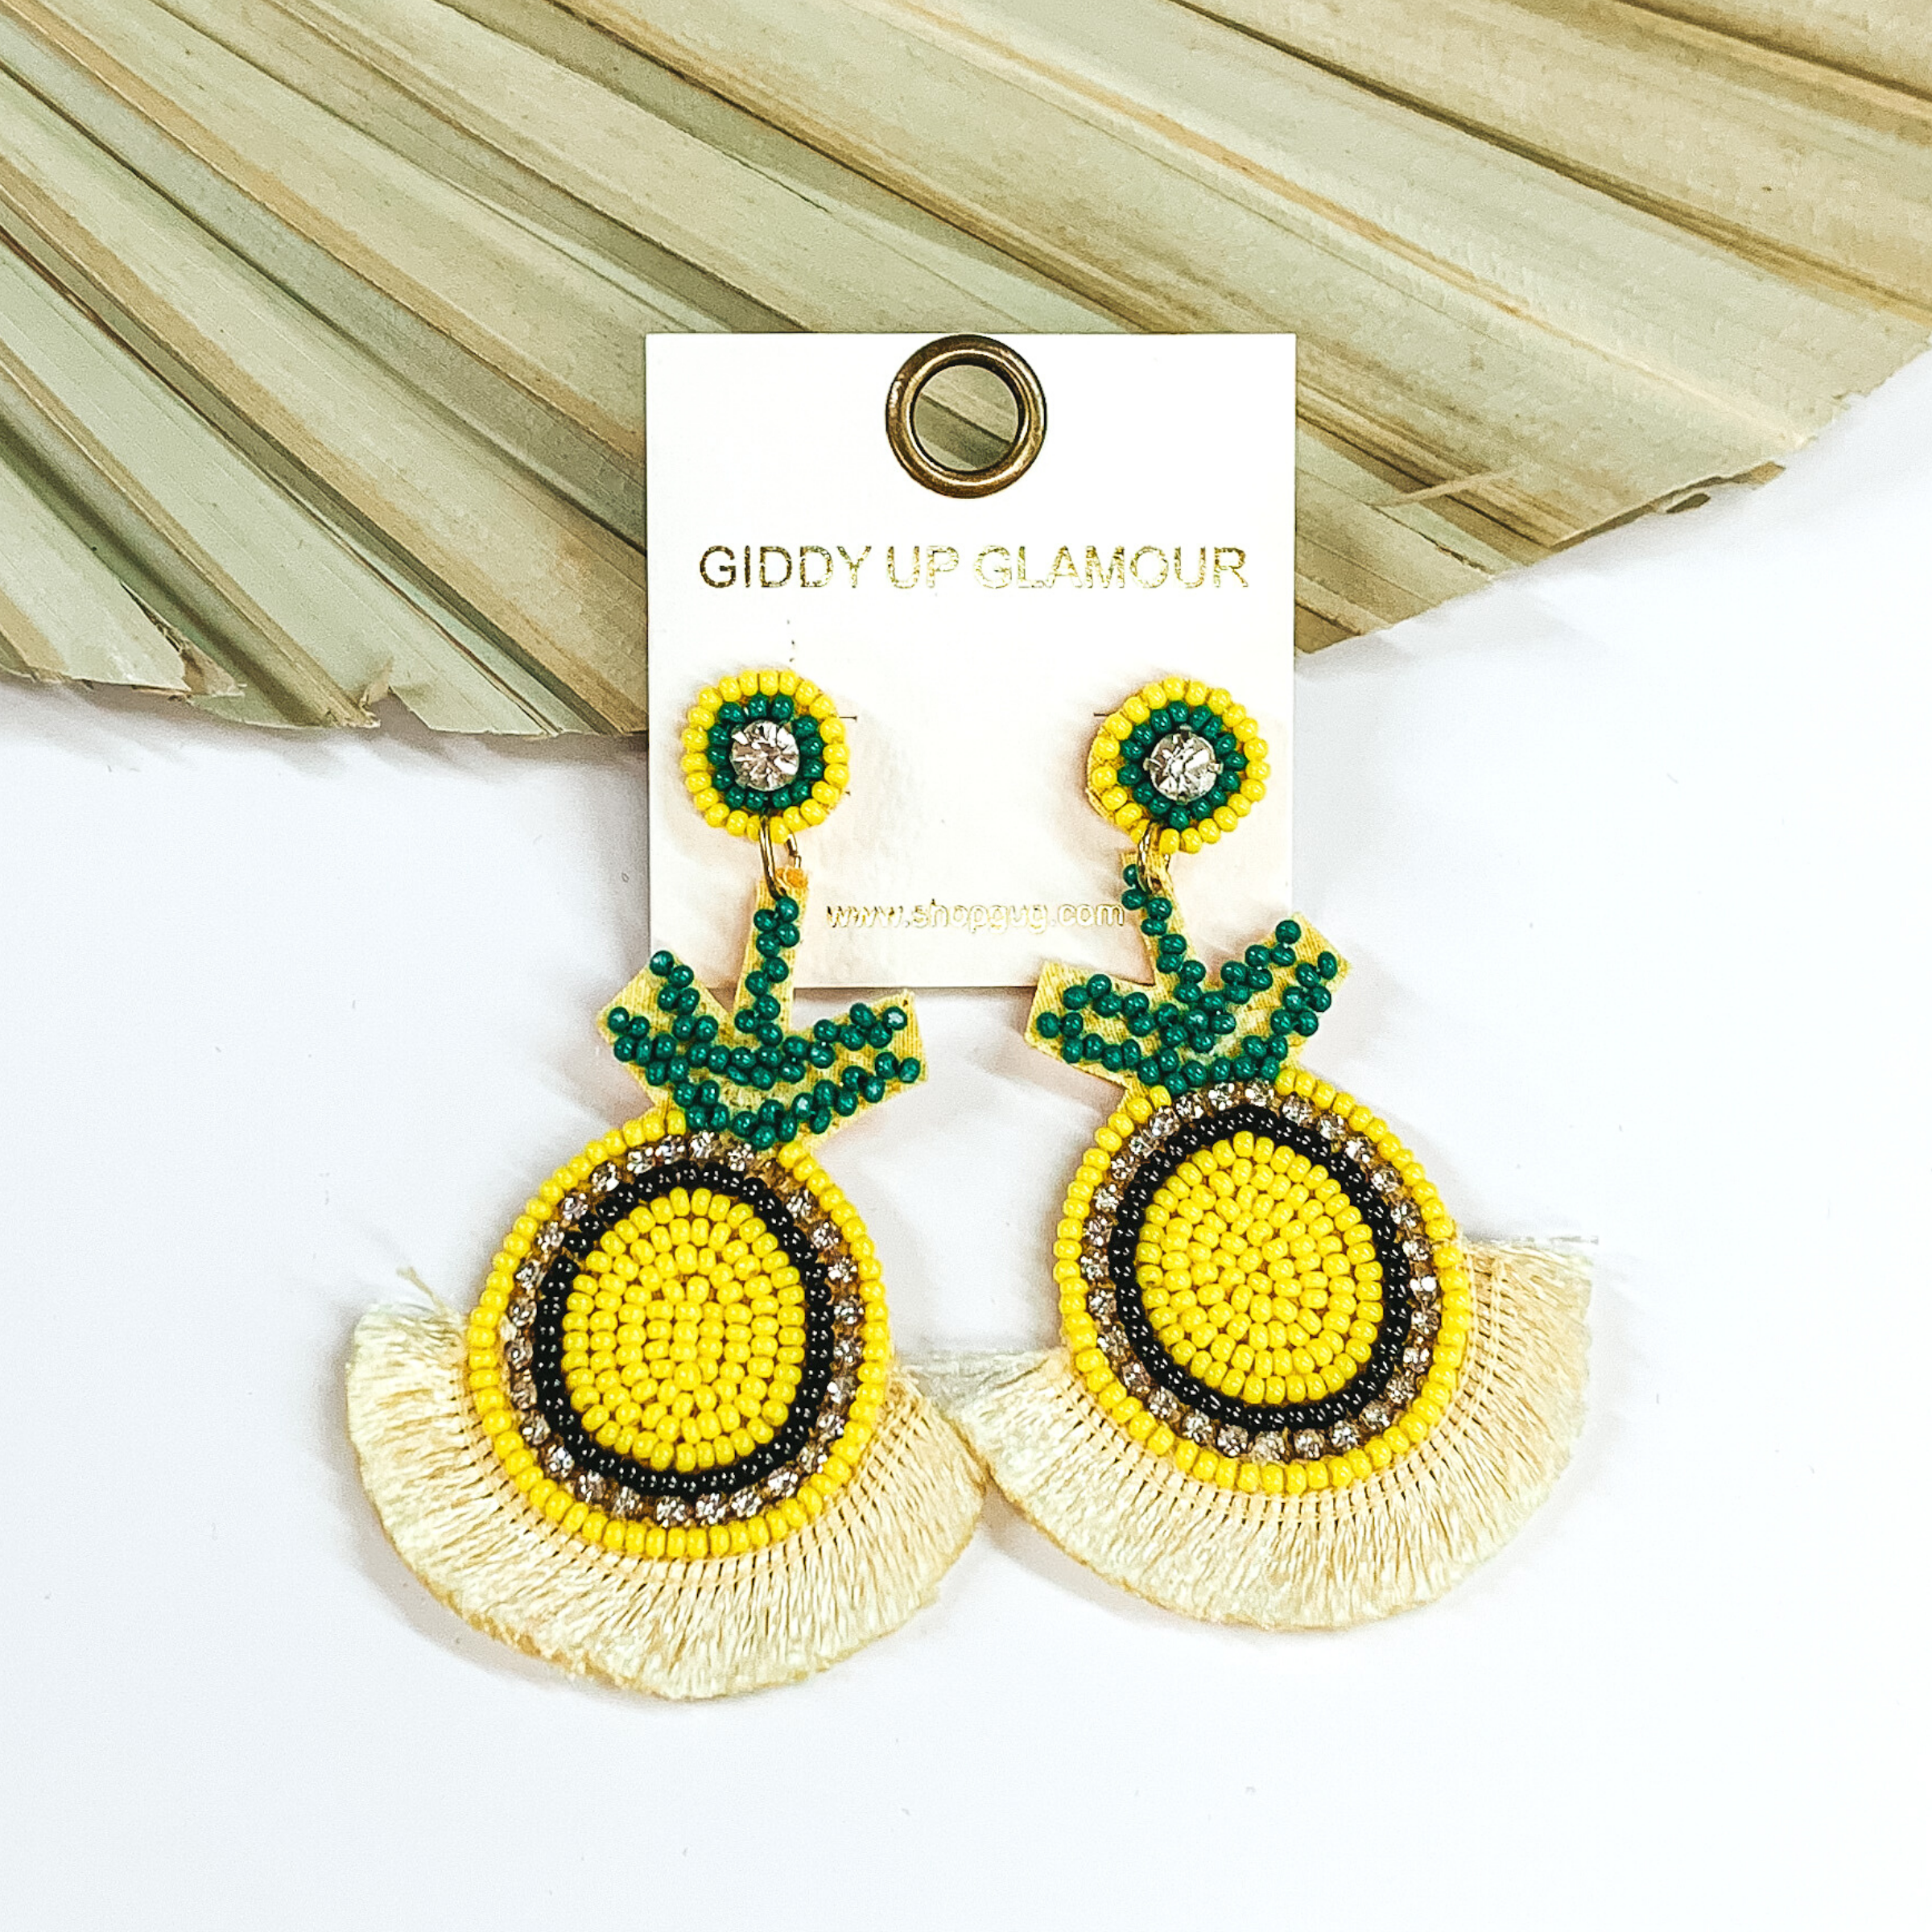 These earrings have circle stud earrings with hanging pineapple shaped pendants with light yellow fringe on the bottom of the earrings. These earrings include yellow, green, and black beads. There are also clear crystals. These earrings are pictured laying in front of a pale green leaf and on a white background.